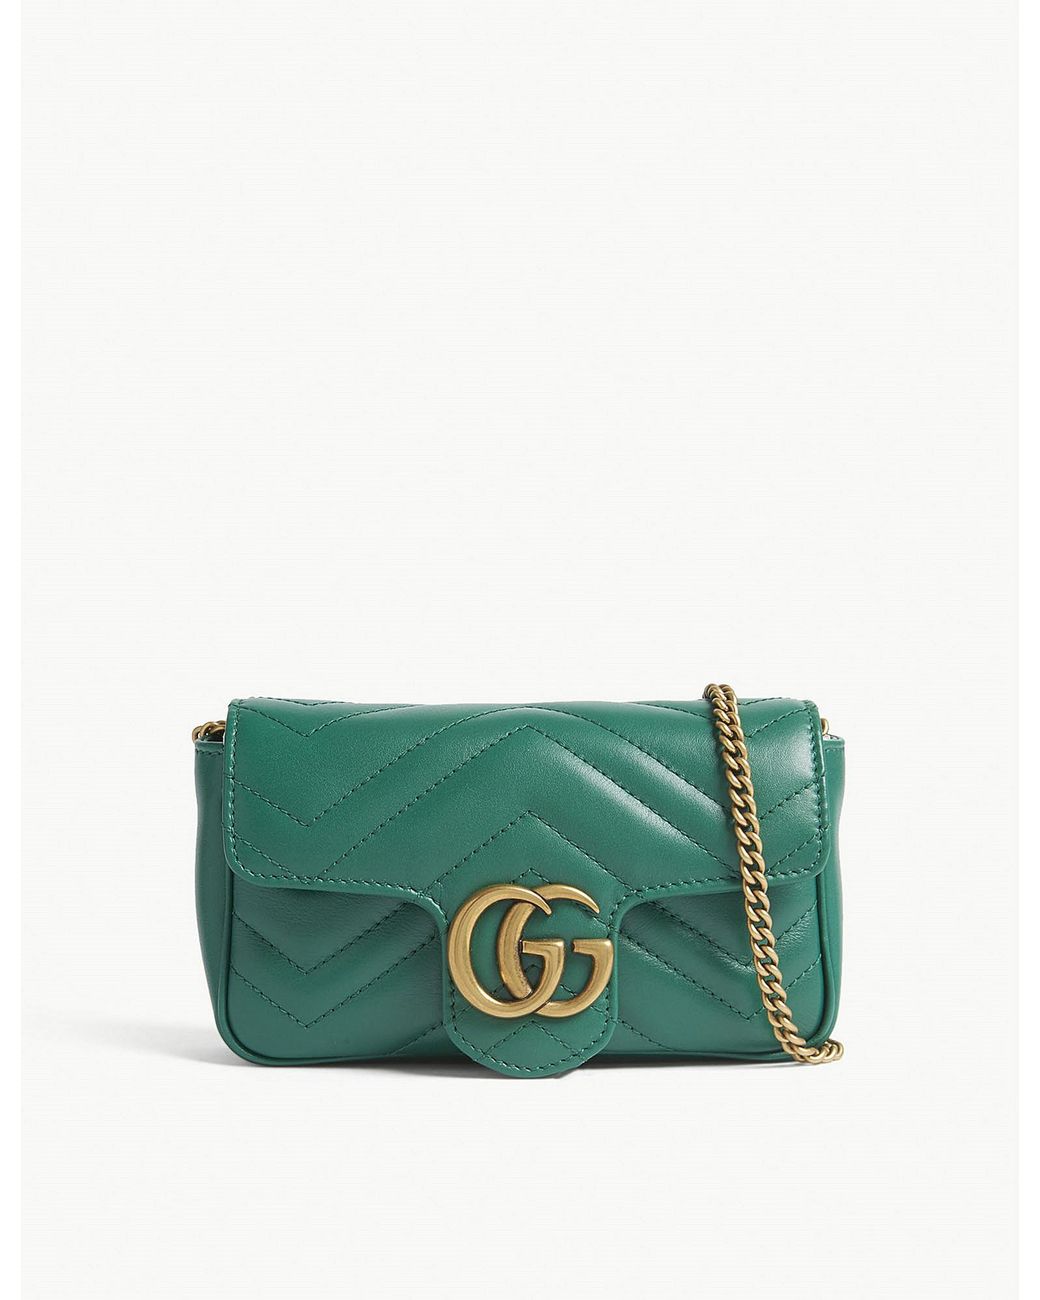 Gucci Marmont Super Mini Leather Shoulder Bag in Green | Lyst